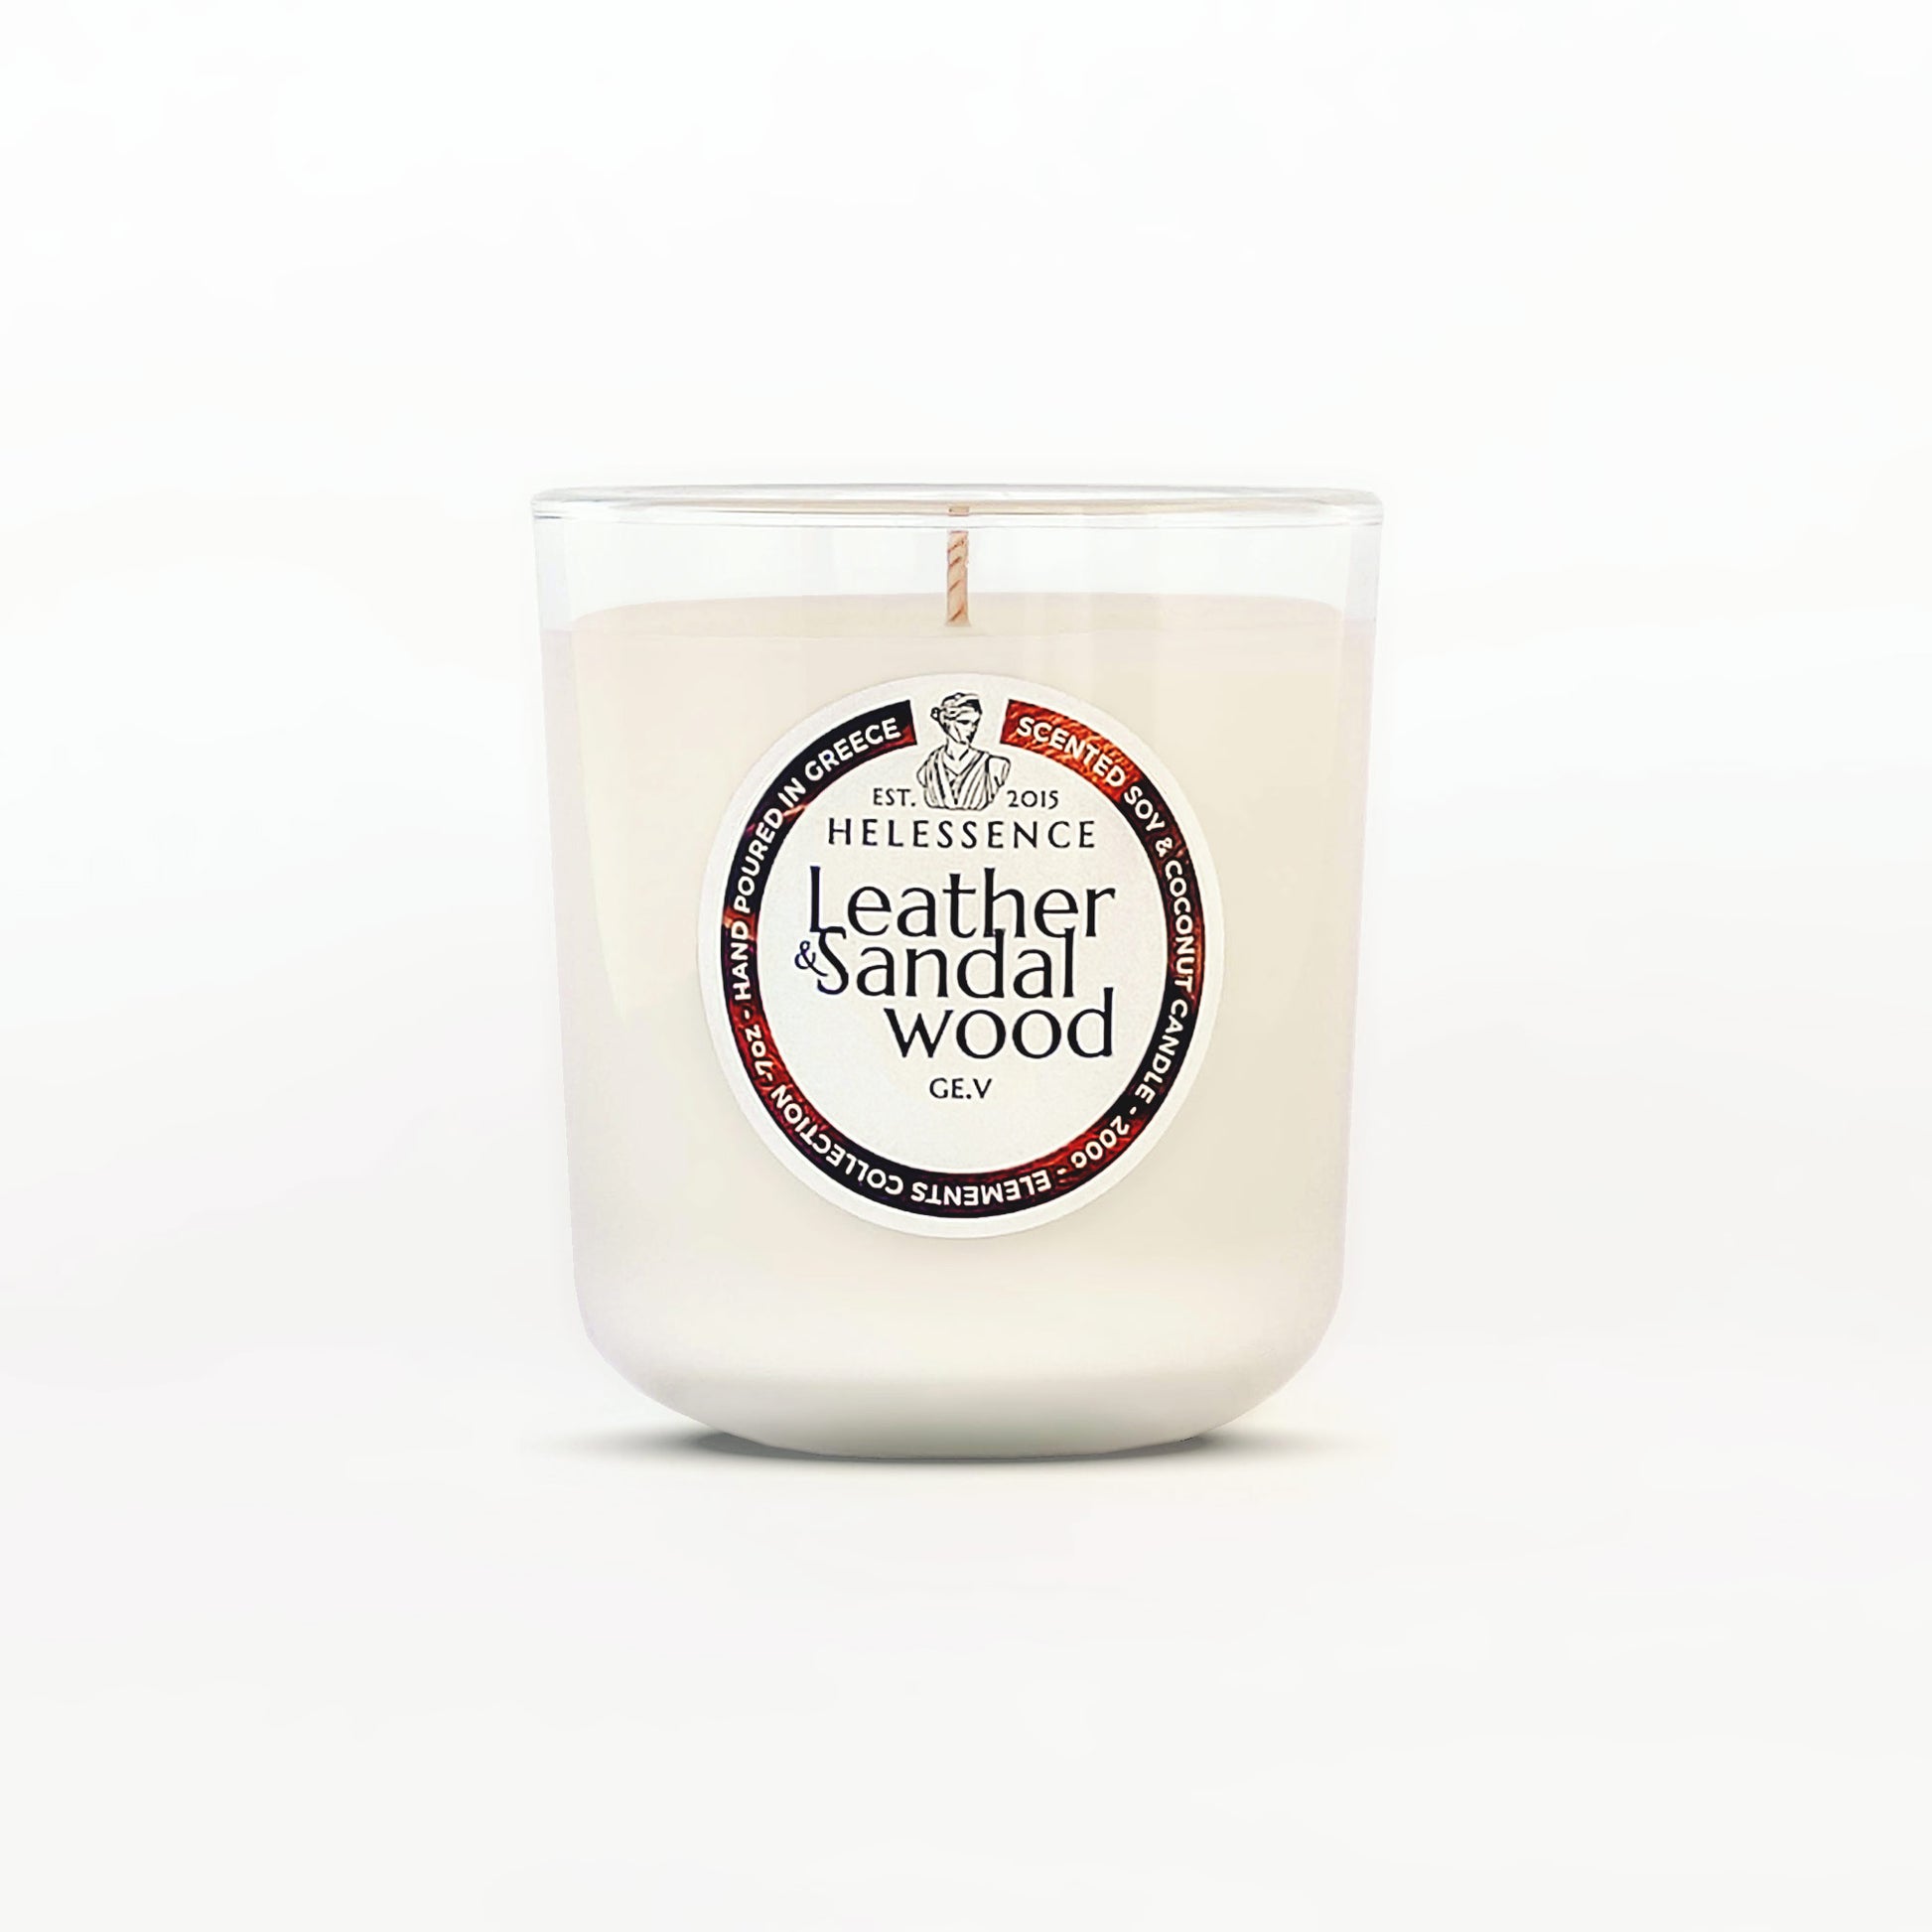 Leather & Sandalwood Scented Candle